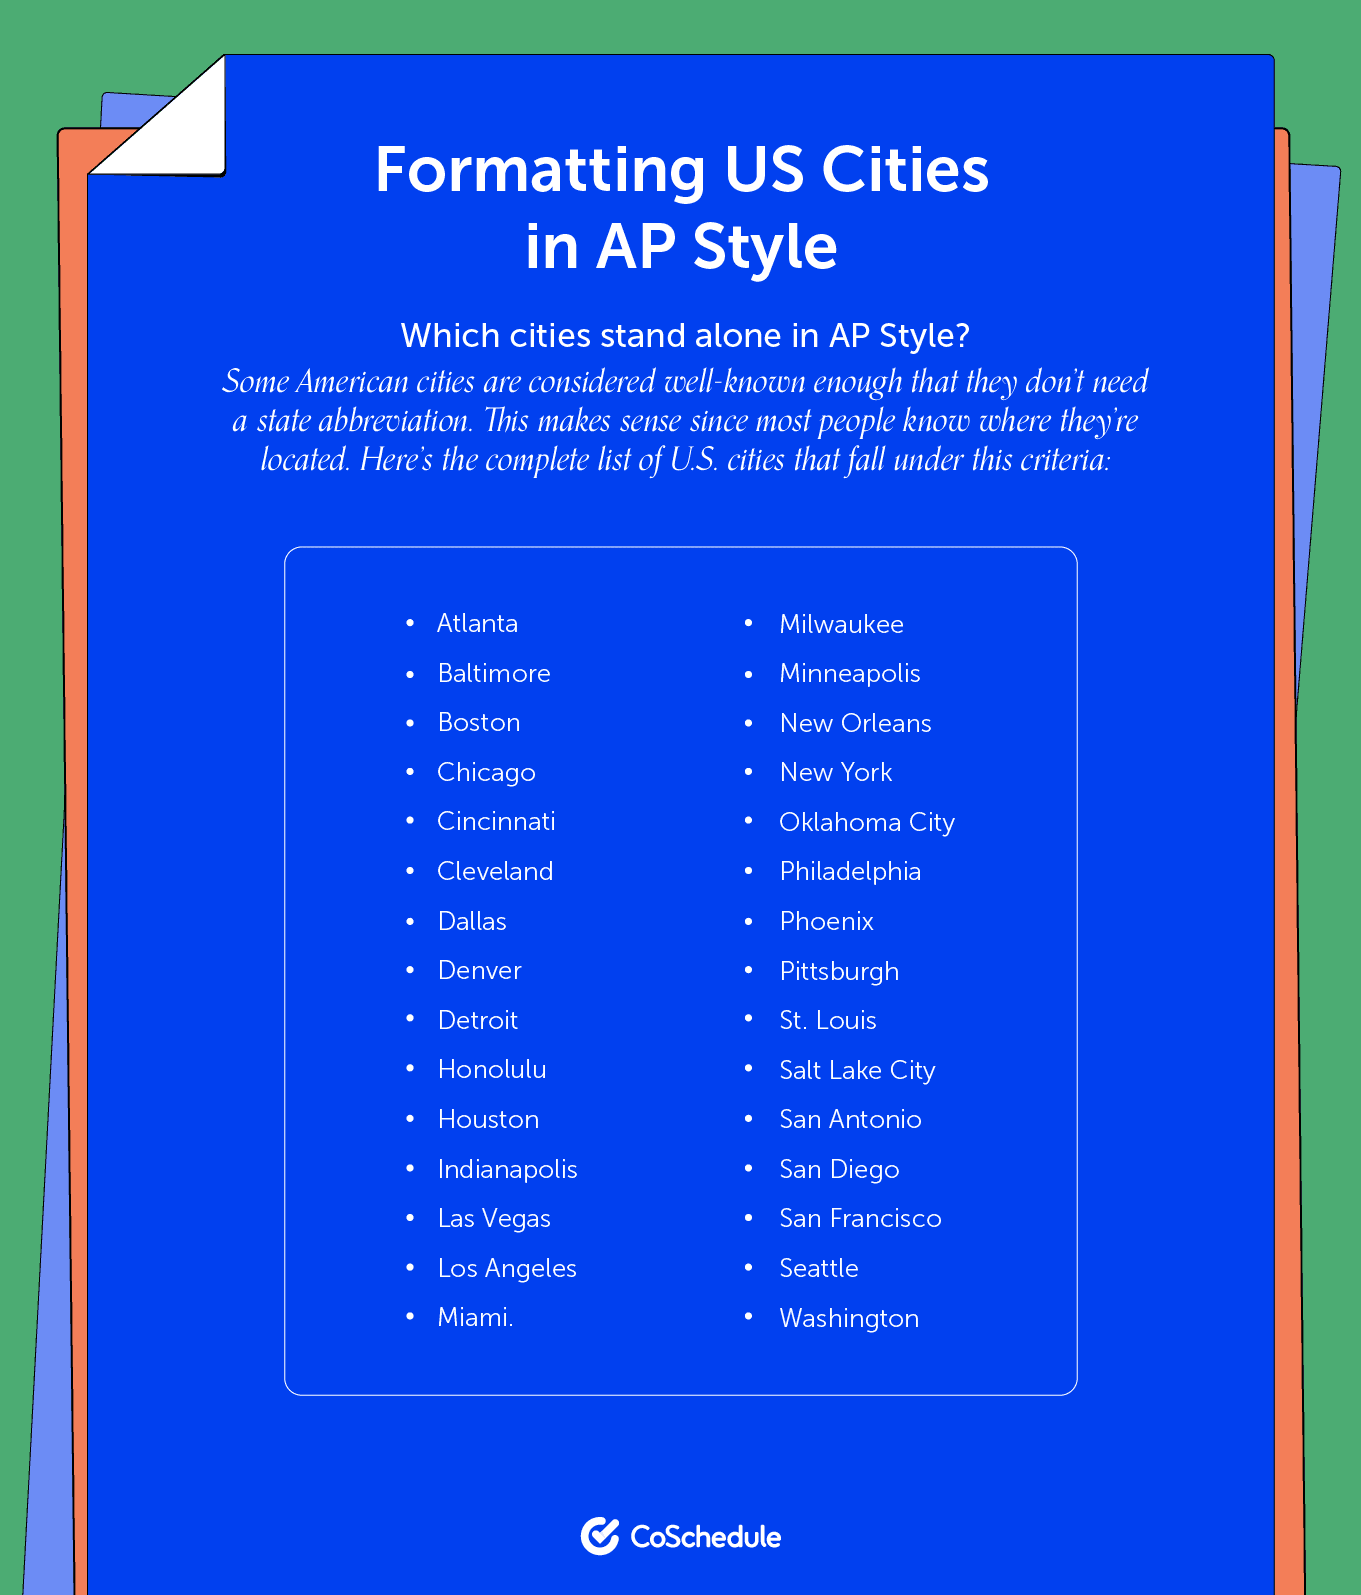 Formatting U.S cities in AP style